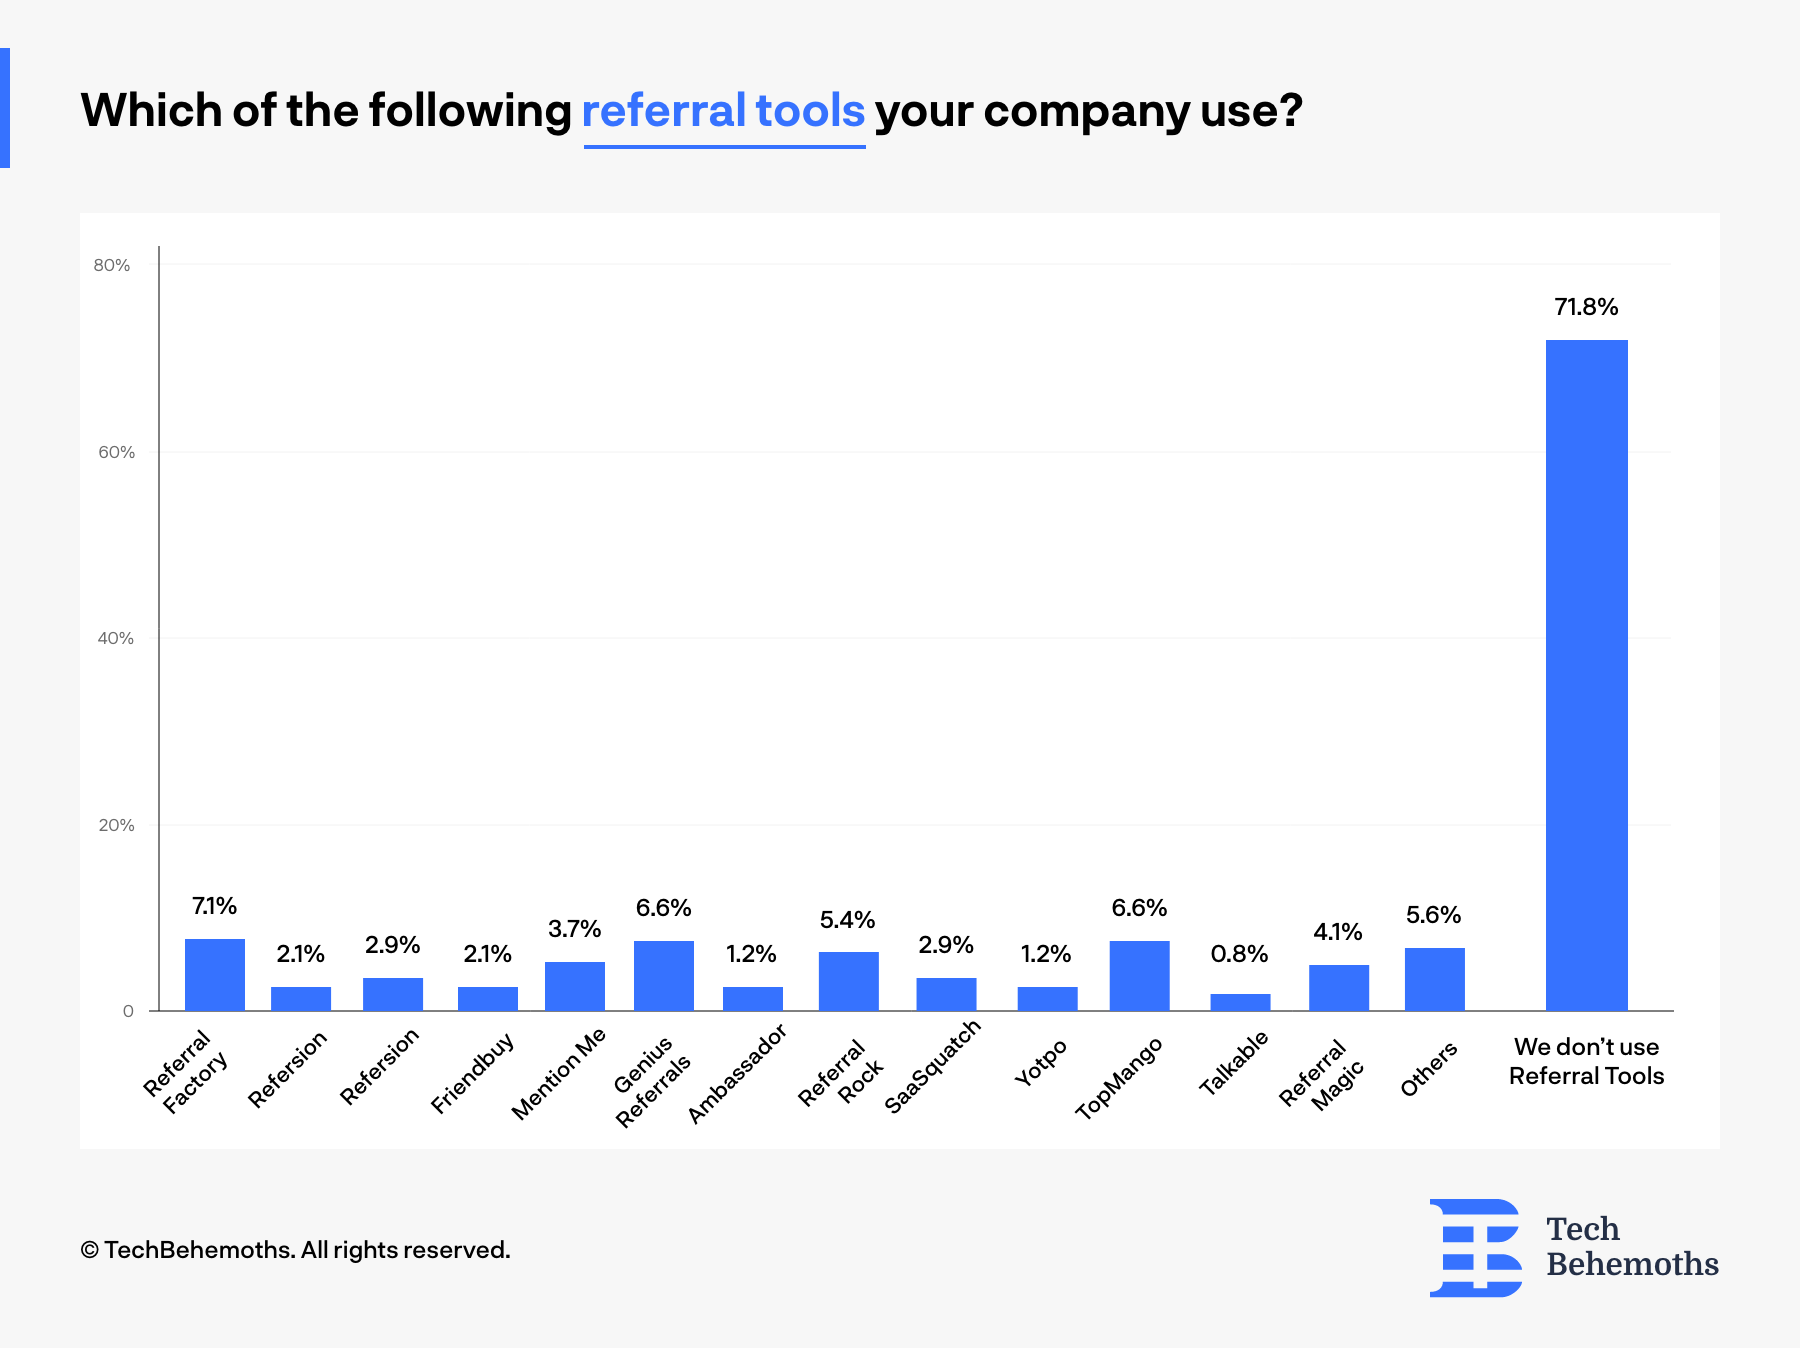 71.8% of IT companies don't use referral marketing at all